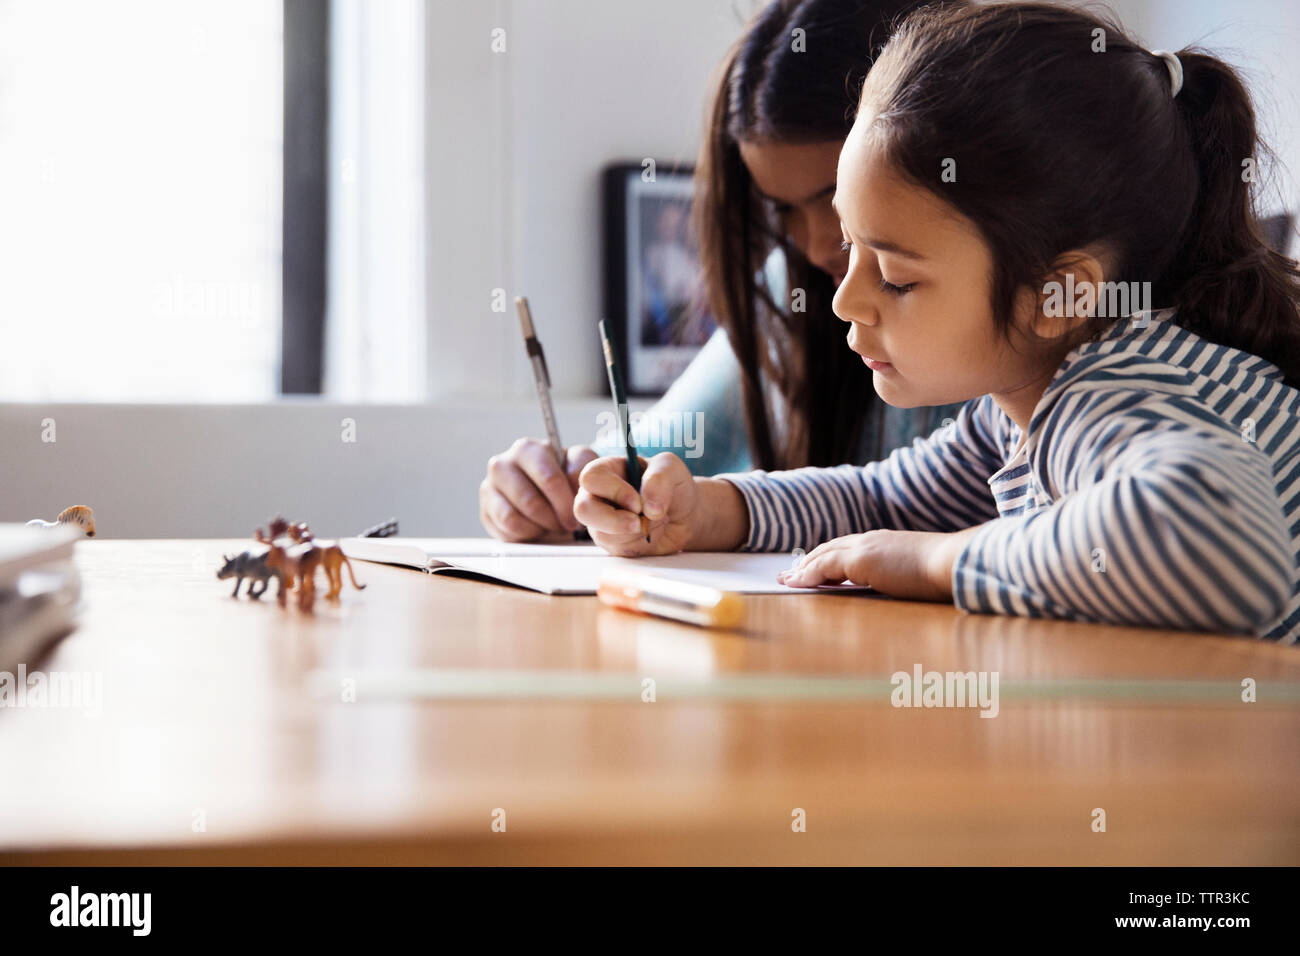 Girls studying while sitting at table Stock Photo